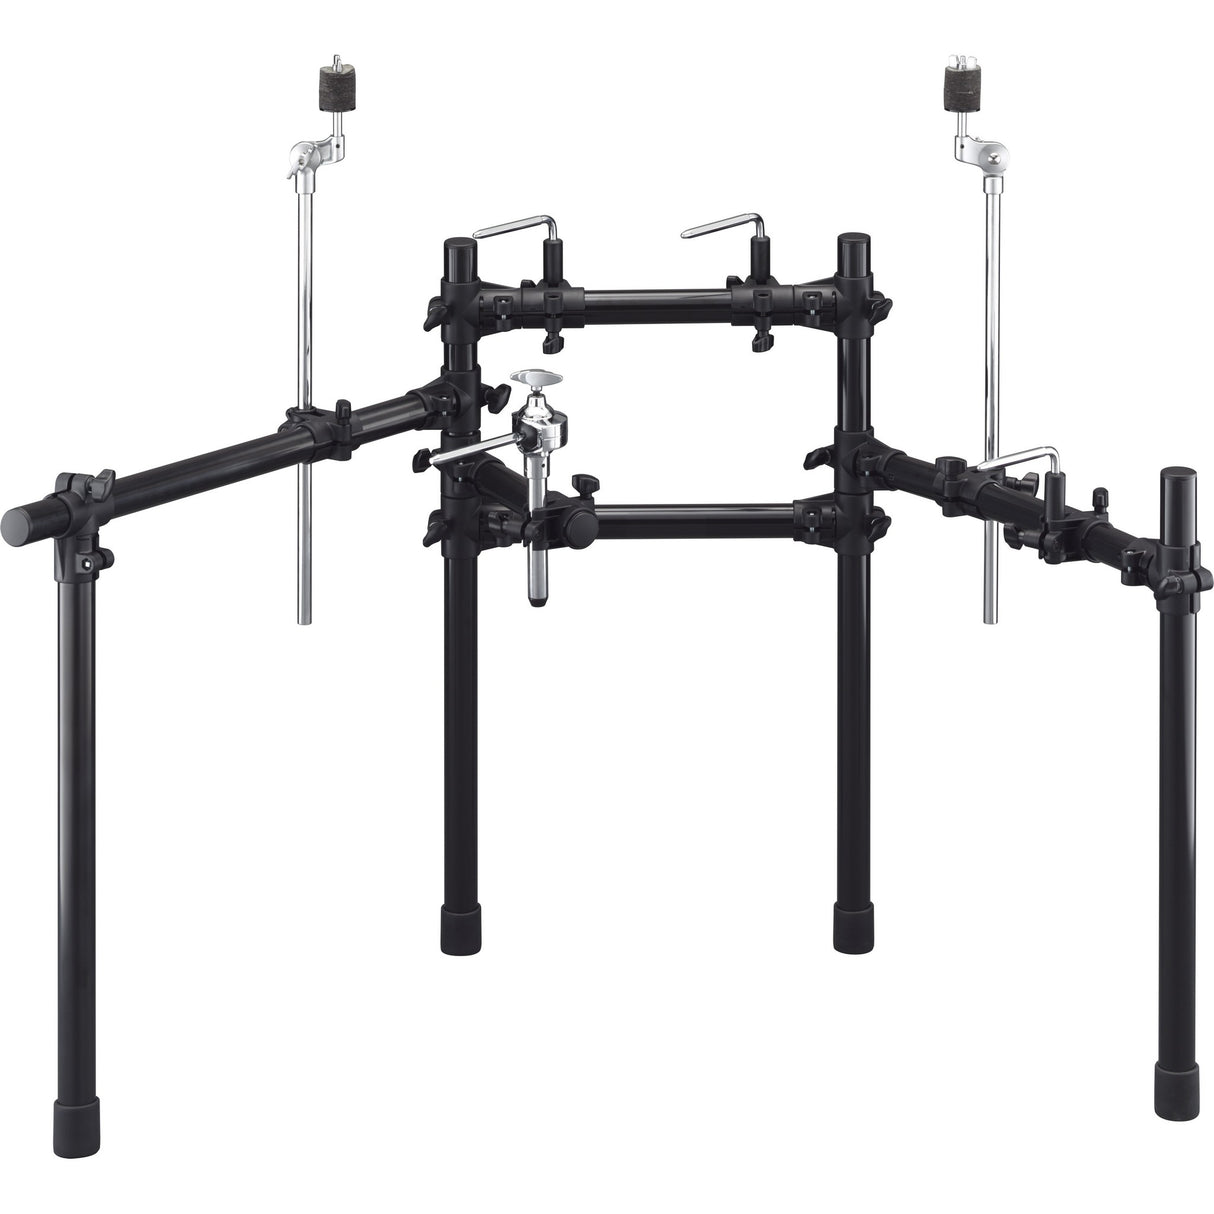 Yamaha RS502 Steel Rack for DTX Drums